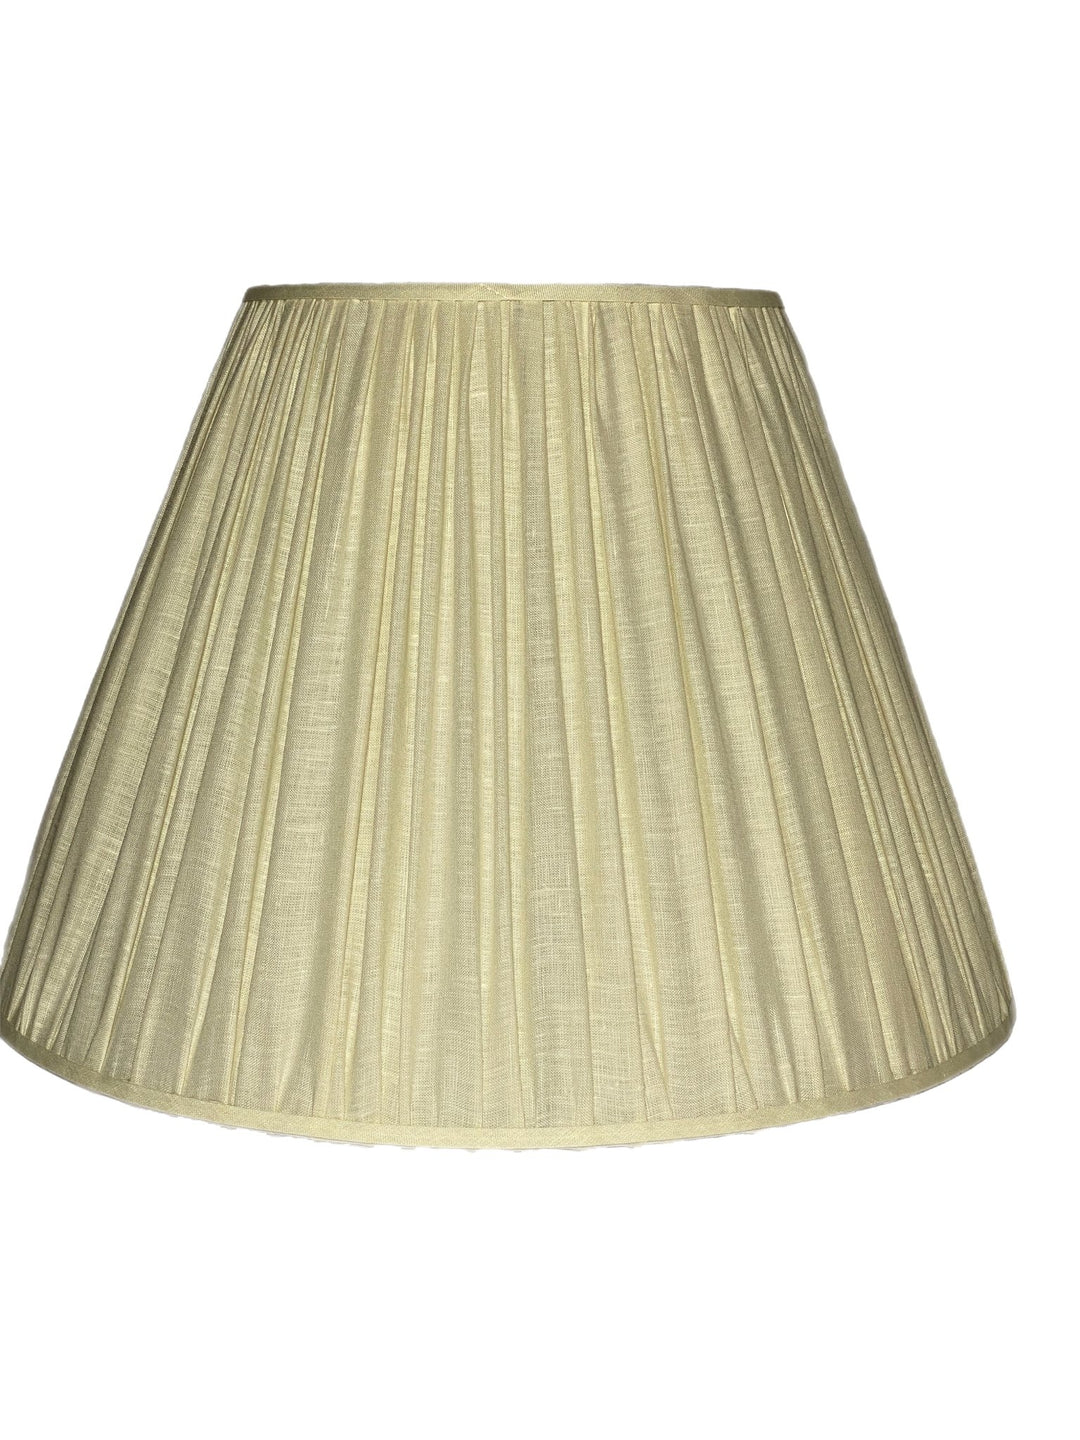 Gathered Sugar Linen Shades - Available in Two Sizes + Add Custom Trim - Lux Lamp Shades